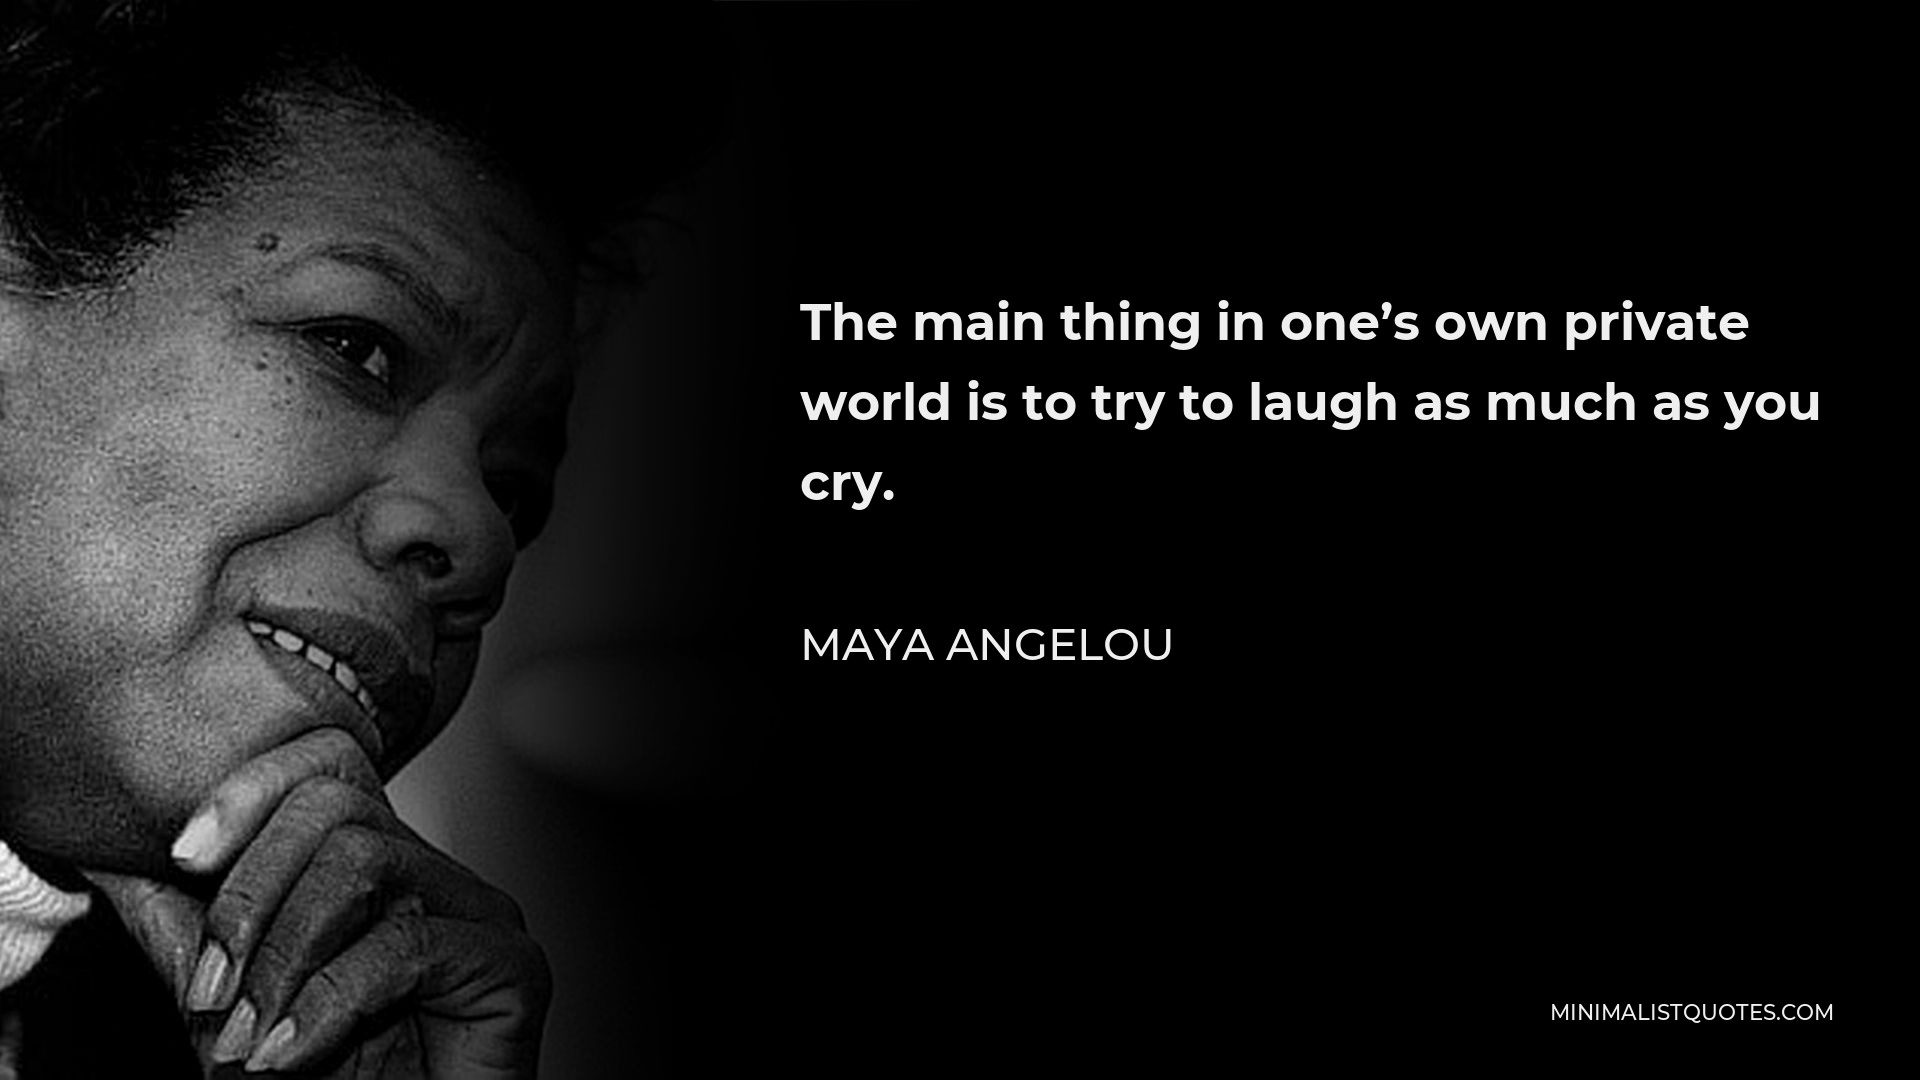 Maya Angelou Quote - The main thing in one’s own private world is to try to laugh as much as you cry.